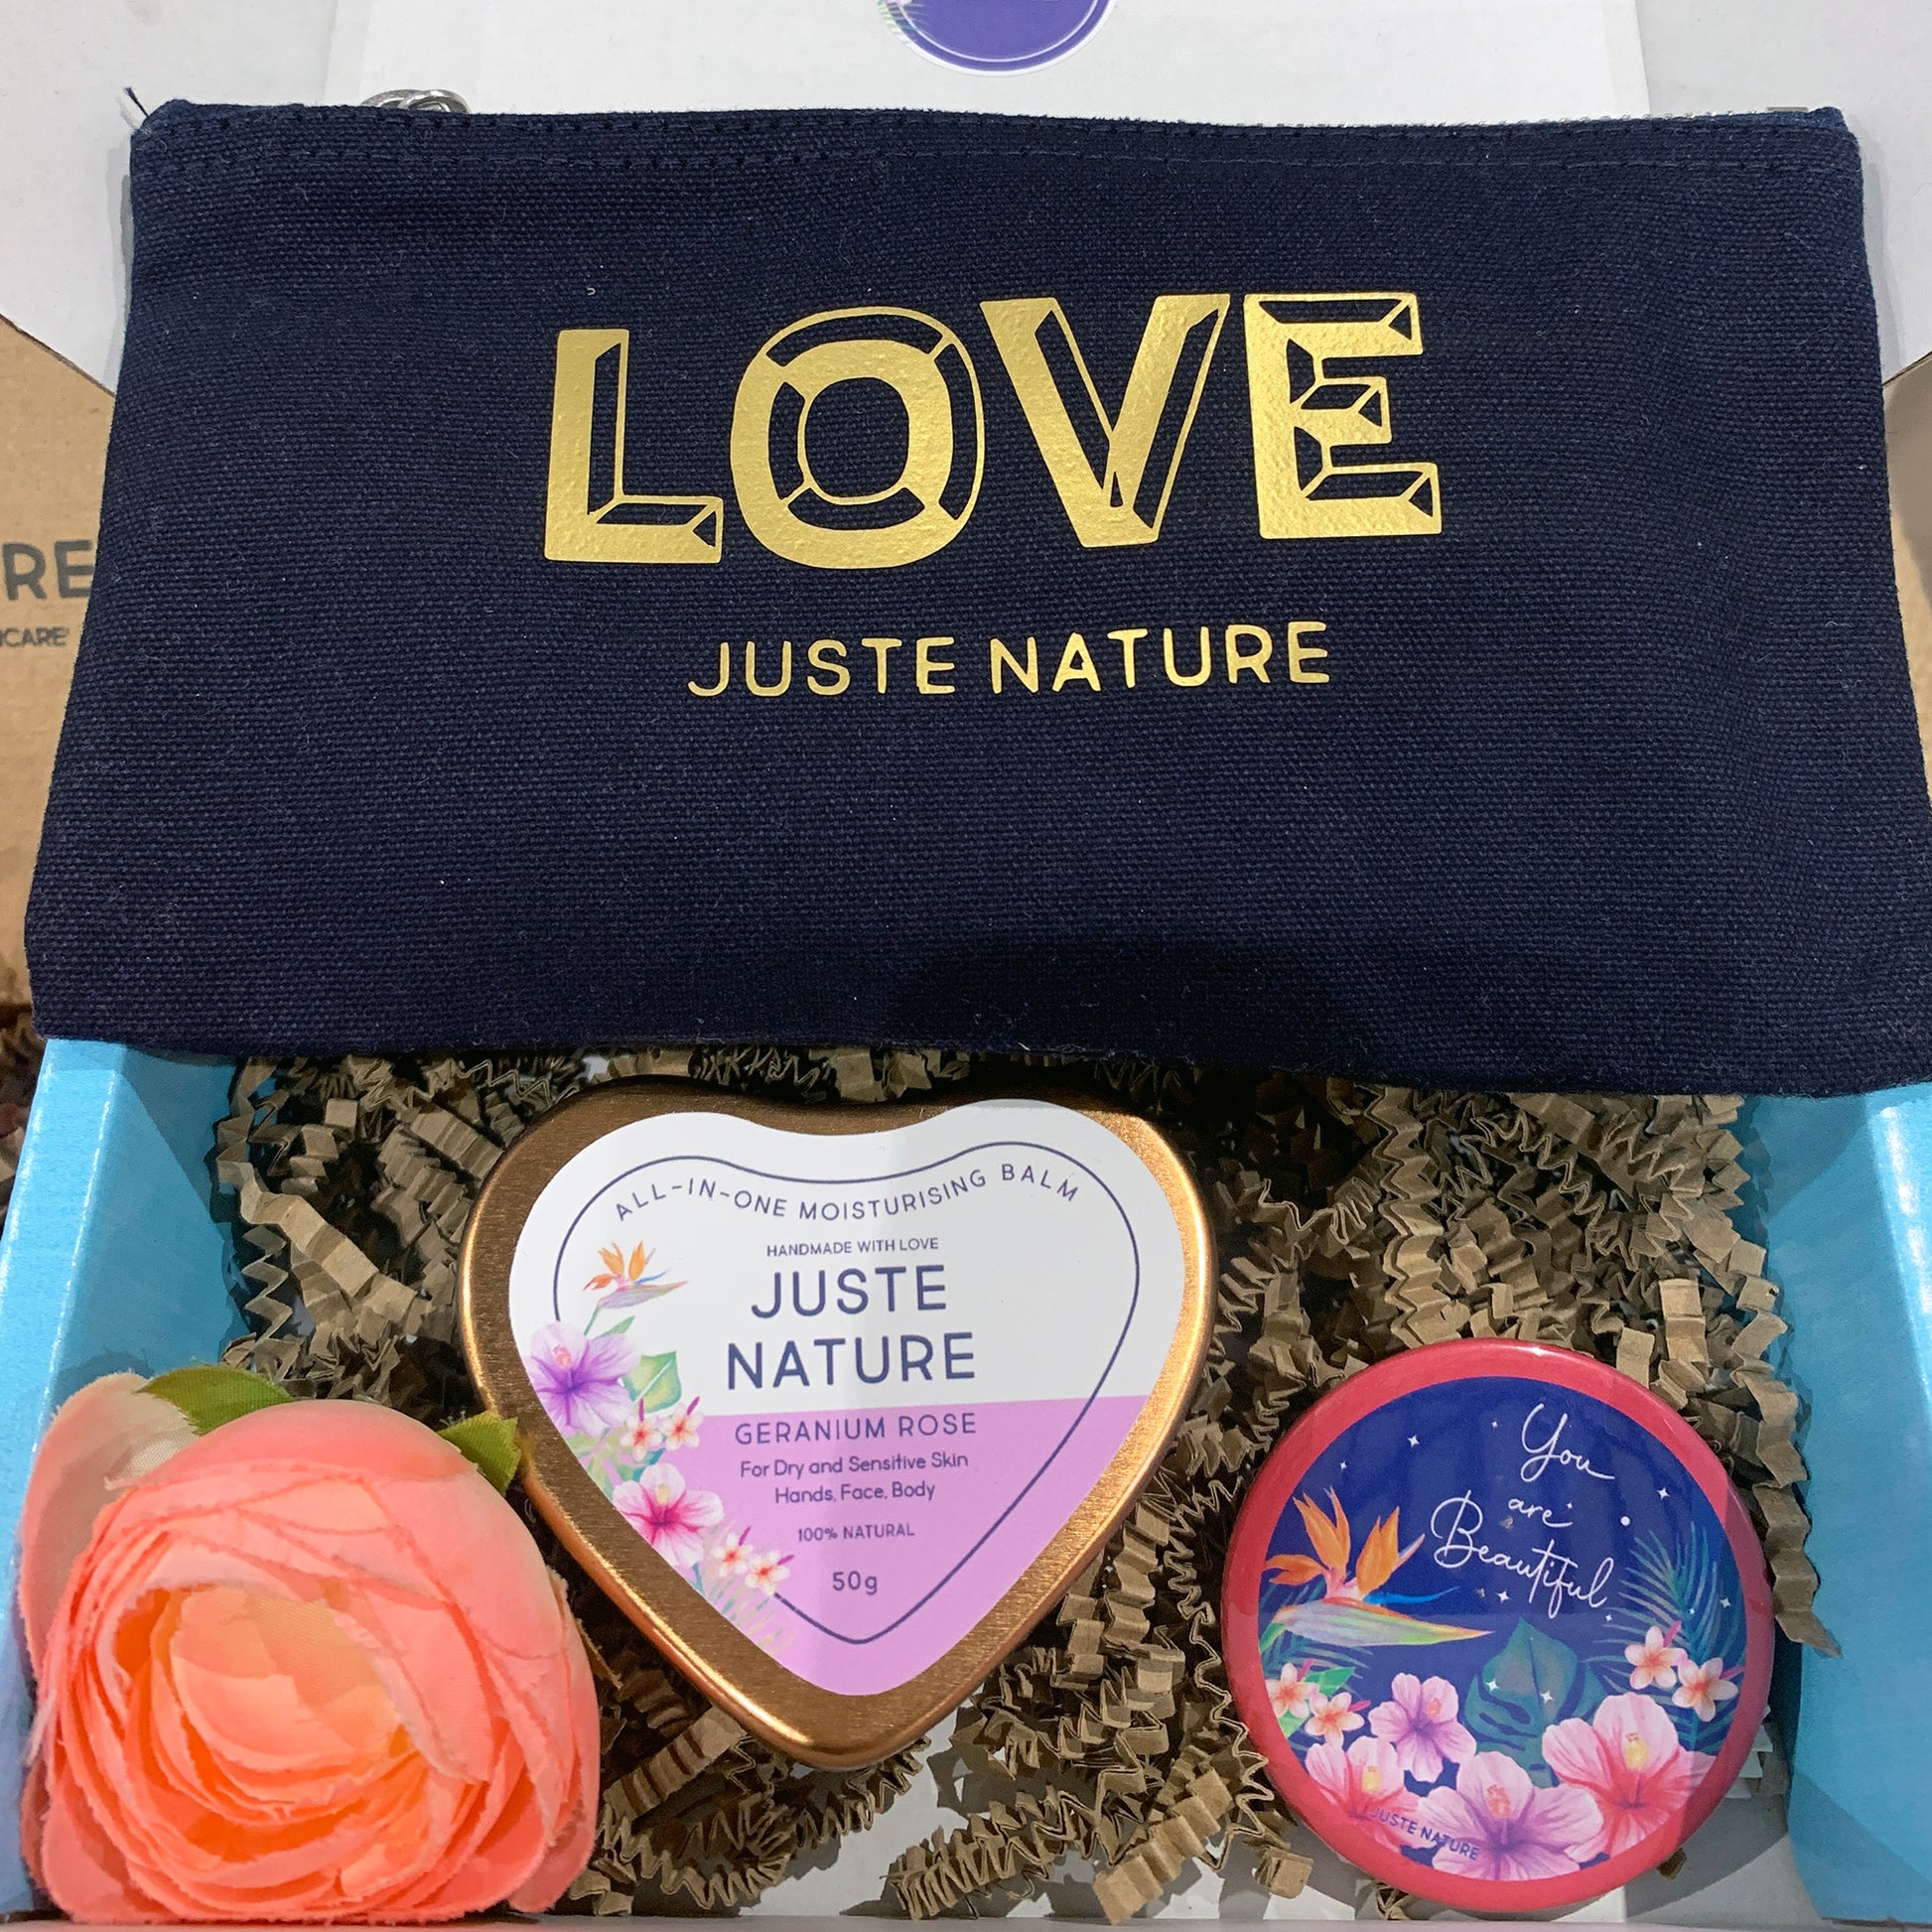 Limited Edition Love heart gift set